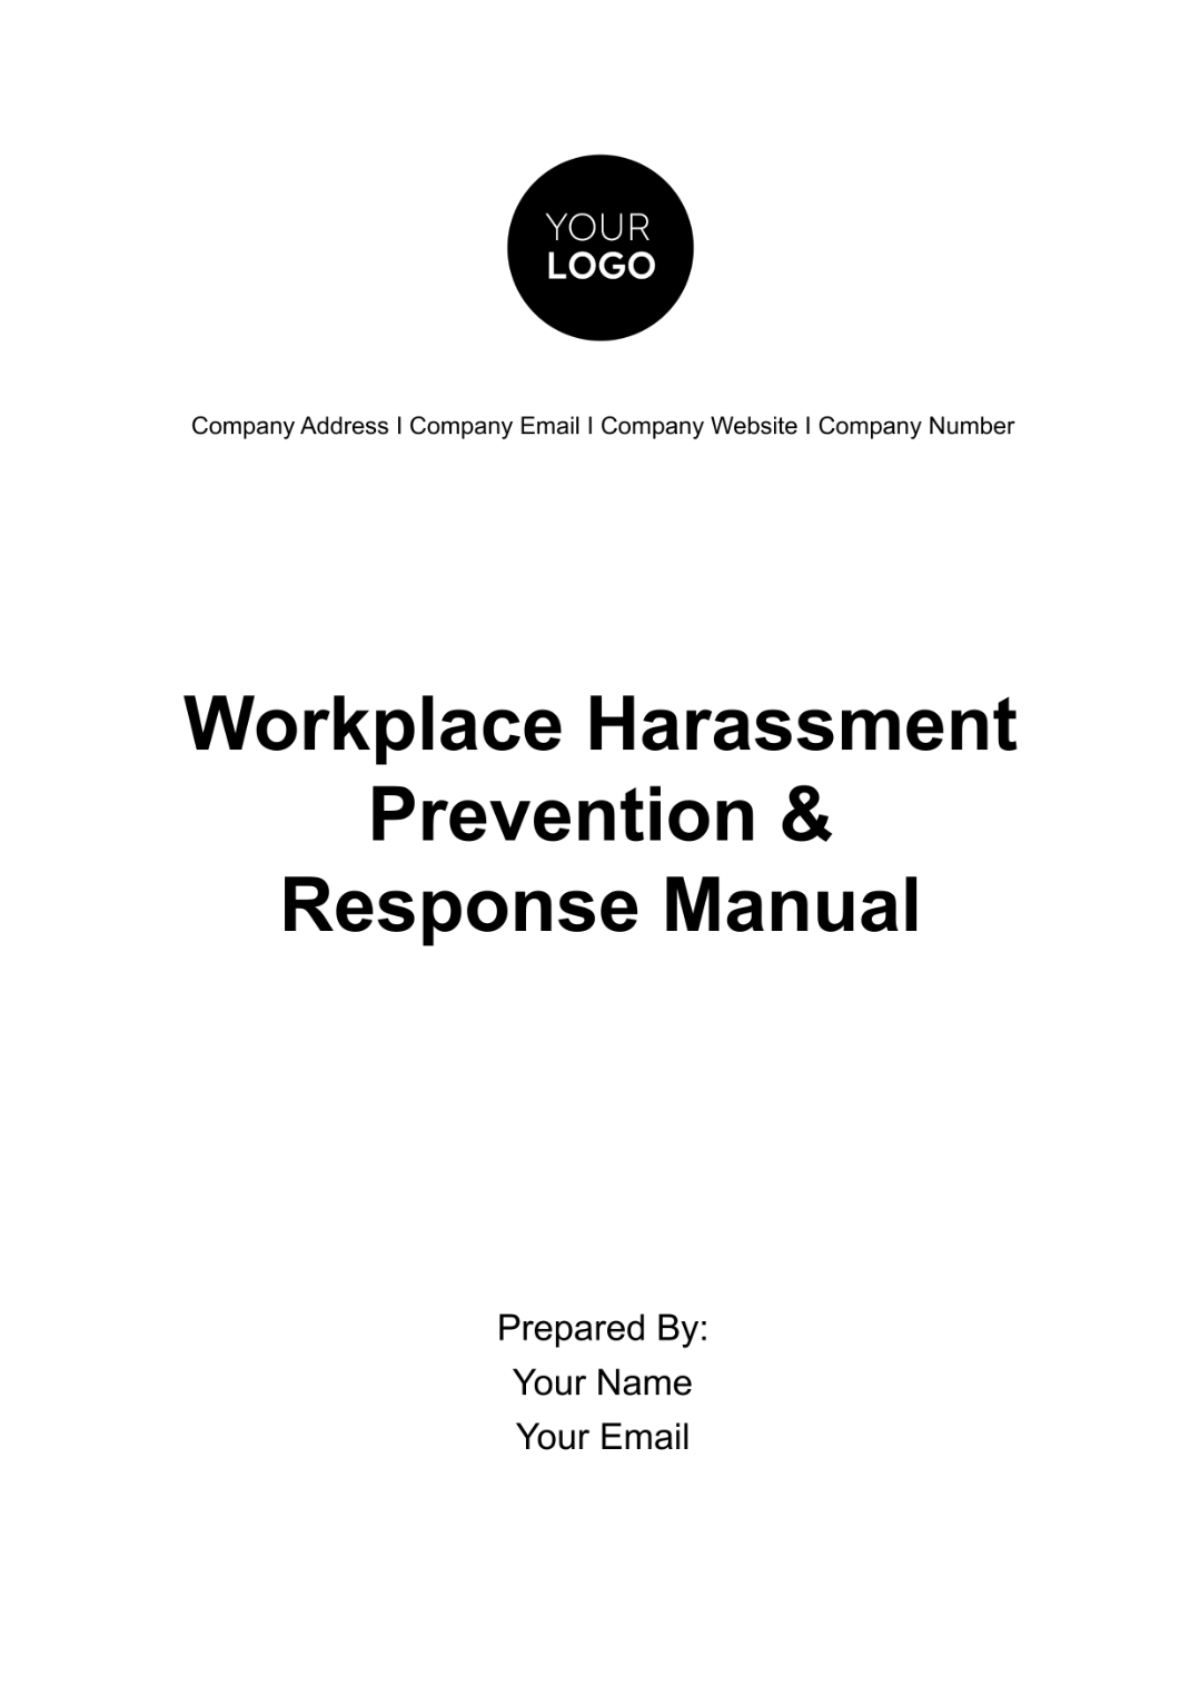 Free Workplace Harassment Prevention & Response Manual HR Template